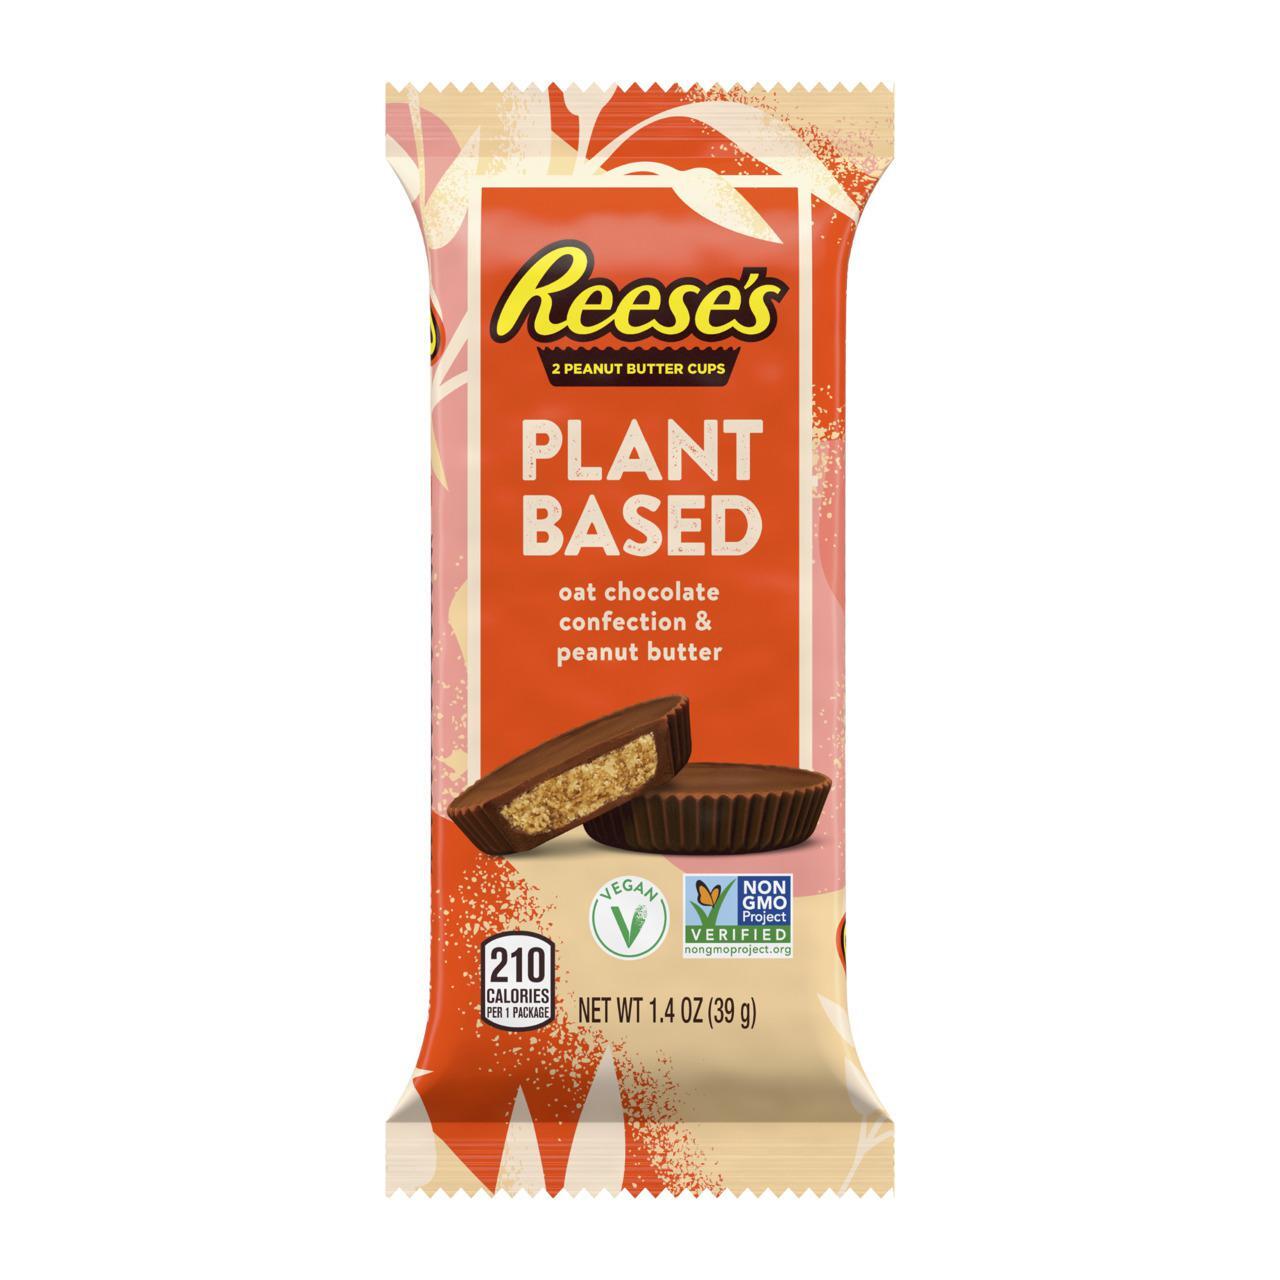 Coming soon: Reese's Cups, chocolate bars made from plants